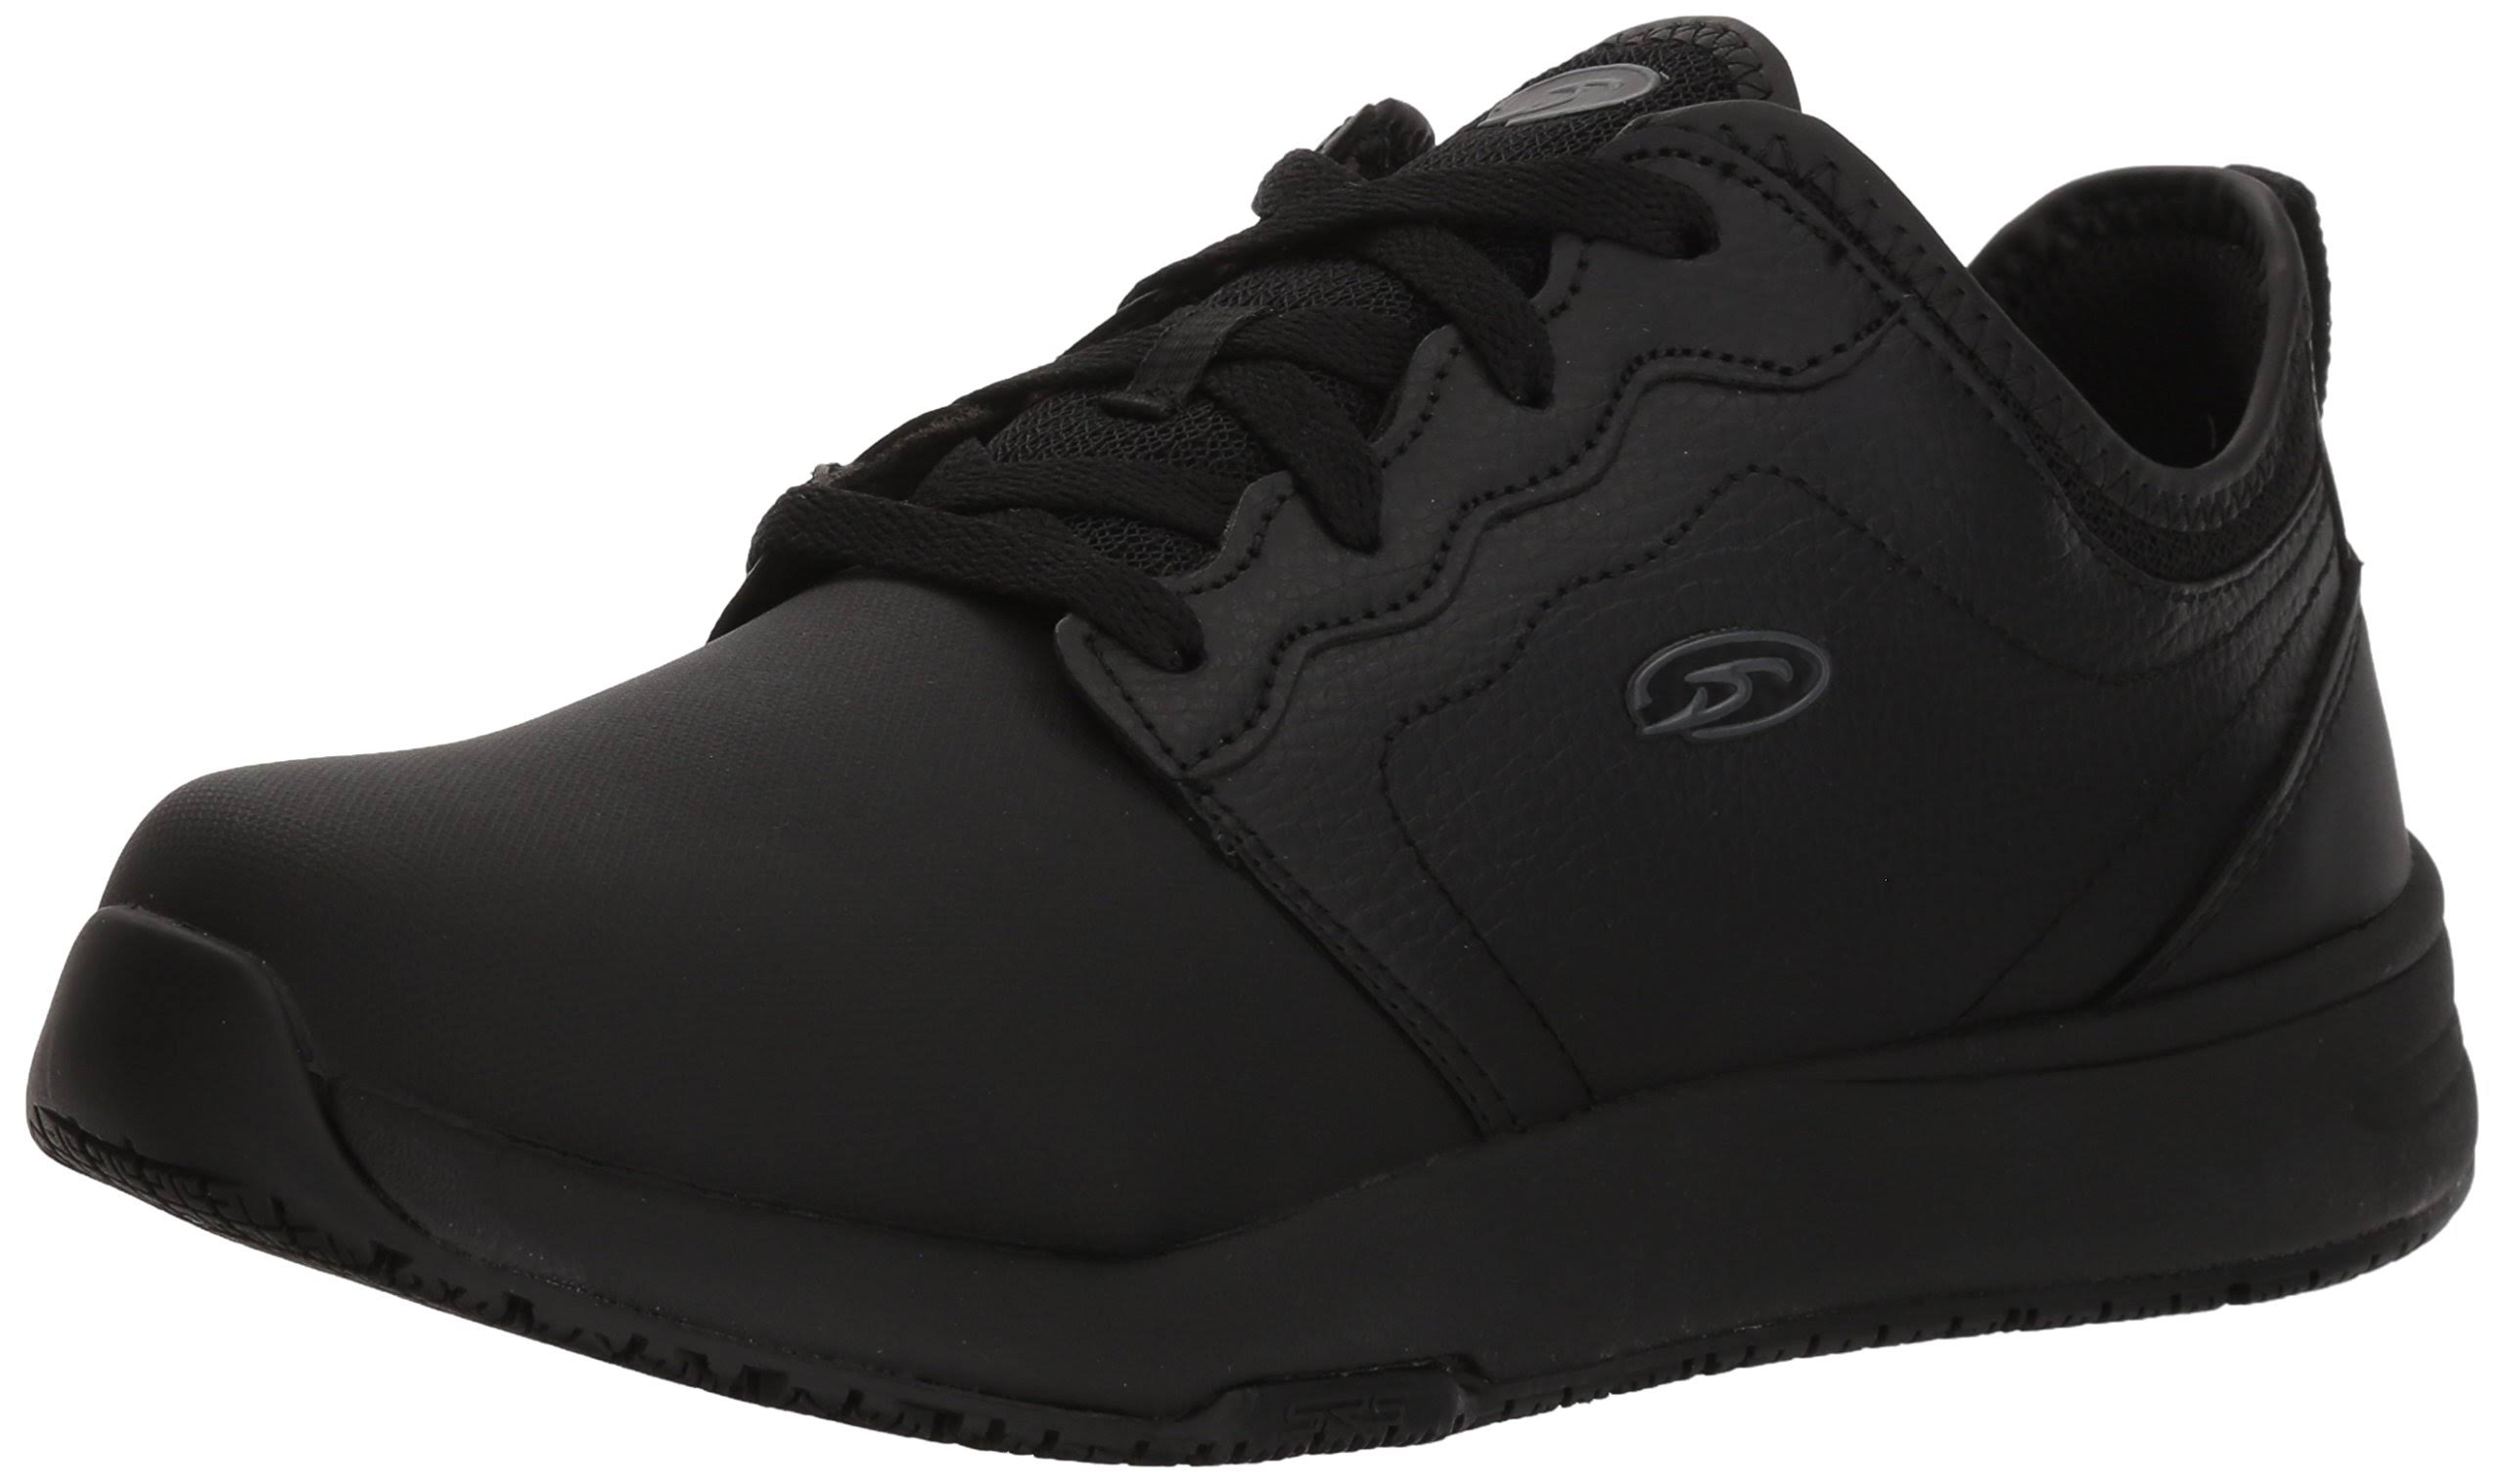 Dr. Scholl's Drive Women's Work Shoes - Black - WGL-2-s